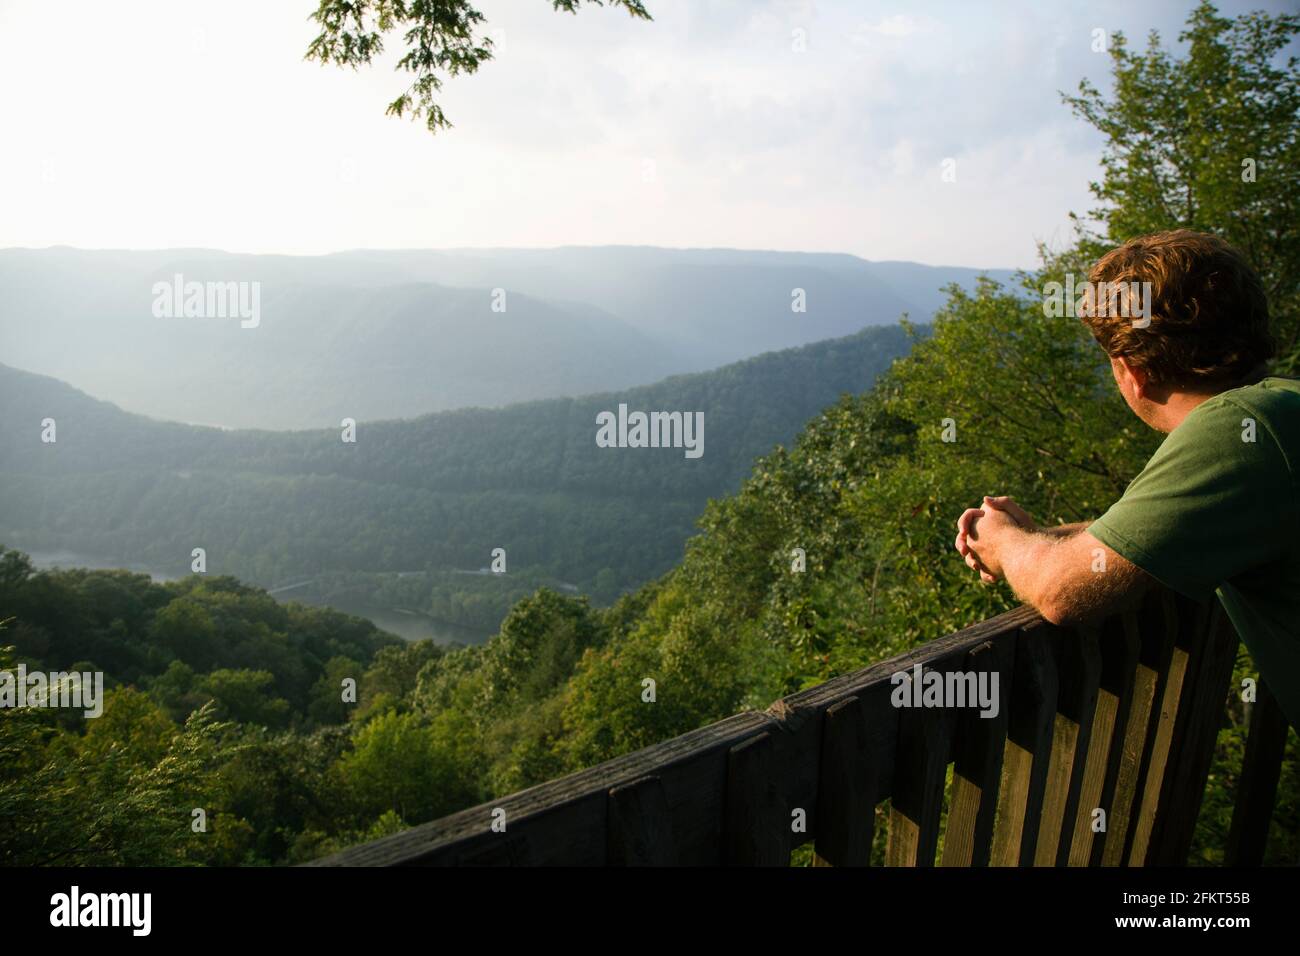 Mid adult man looking at view from viewing platform, rear view, New River Gorge National River, Fayetteville, West Virginia, USA Stock Photo